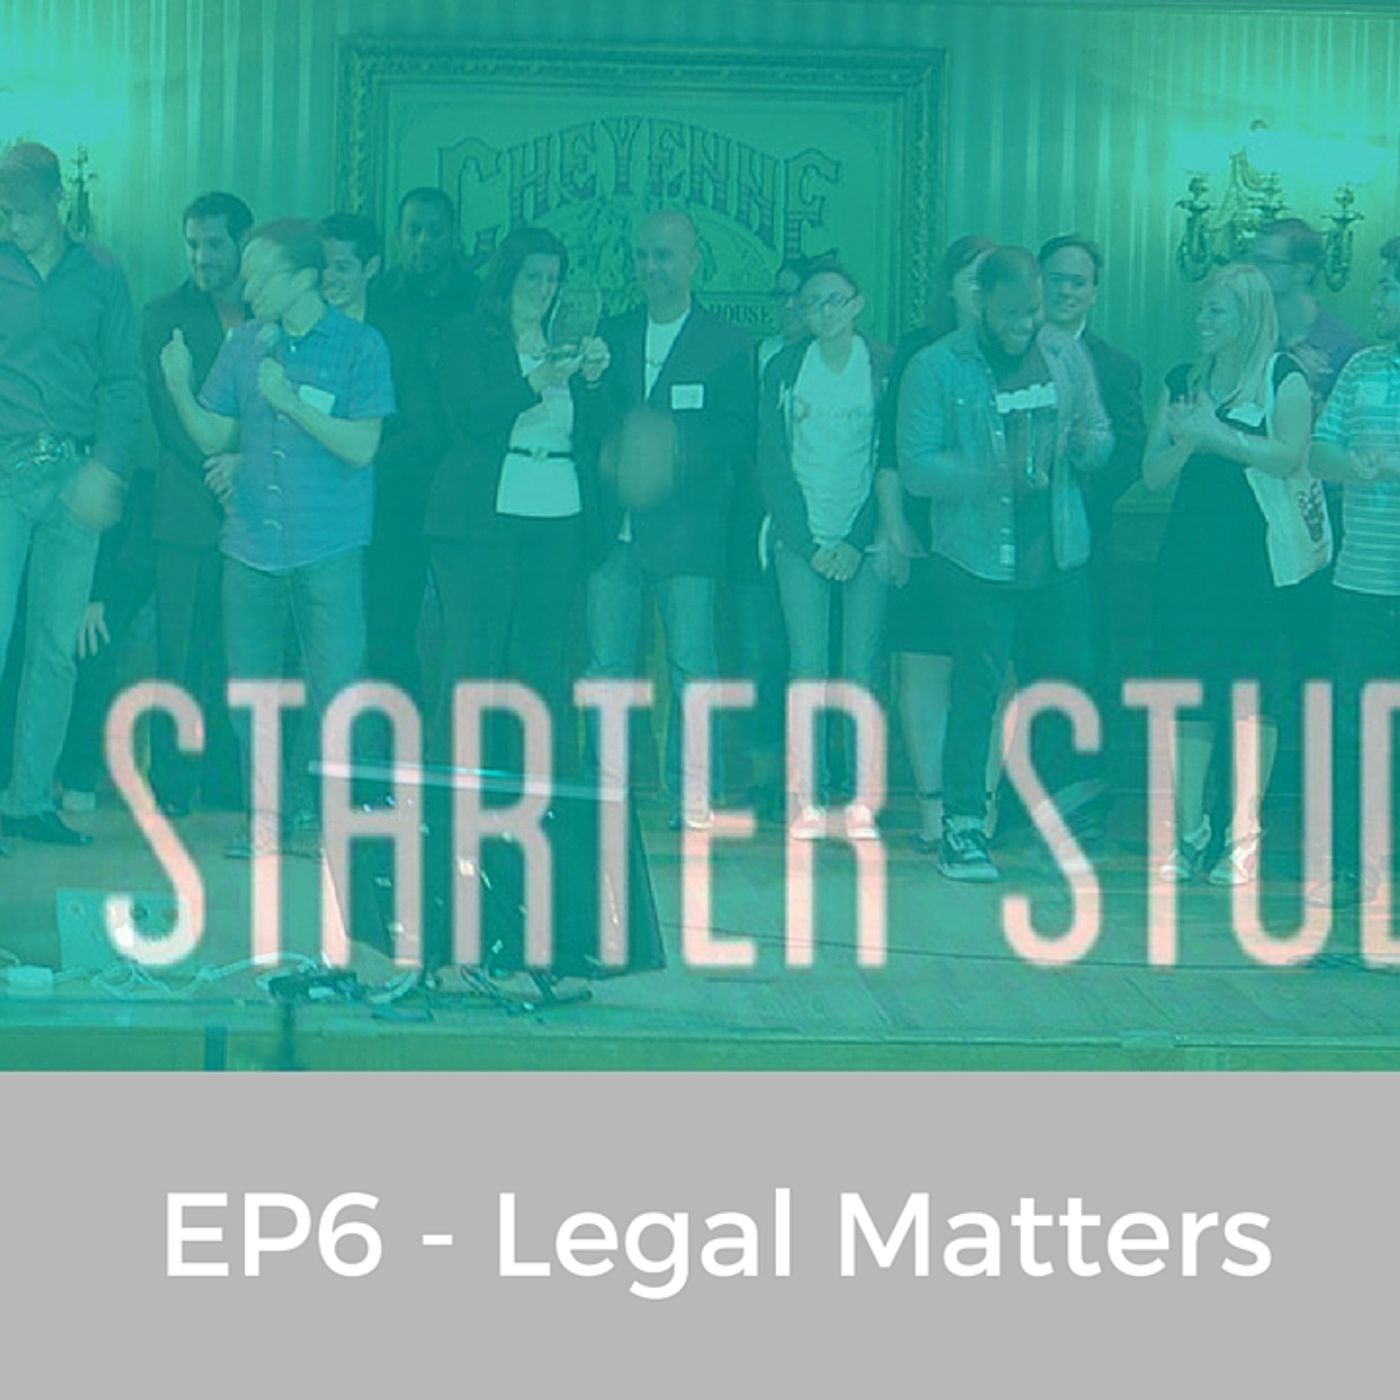 EP6 - Legal Matters